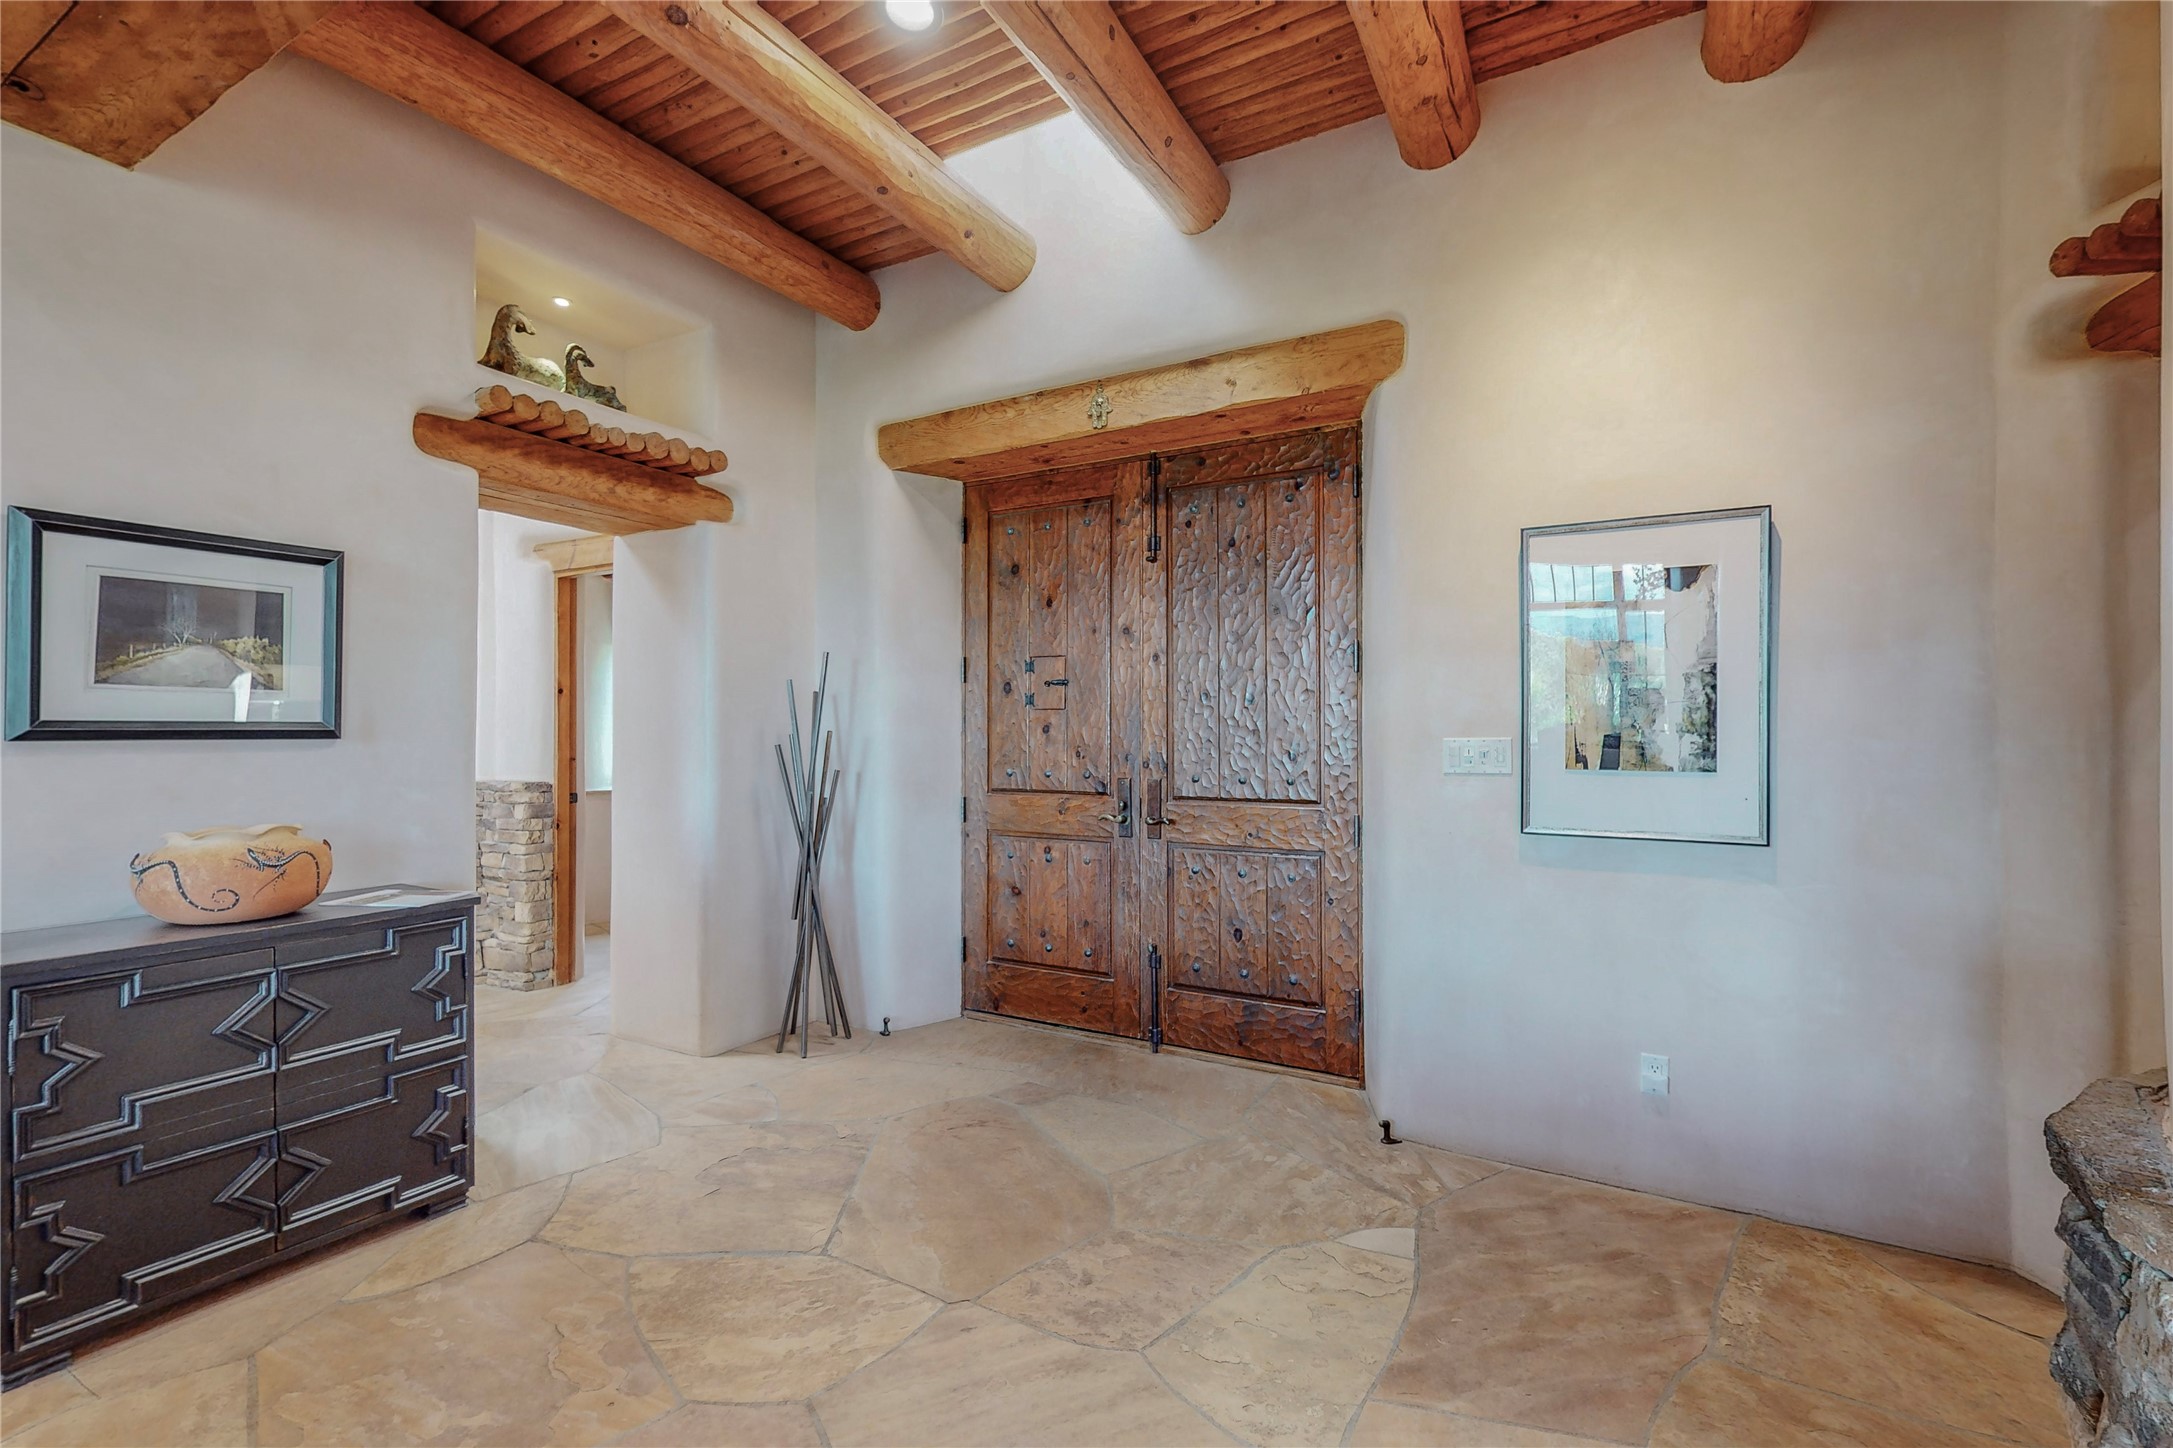 Living room upon entry with picture window that frames the view of the Sangres de Cristo mountains